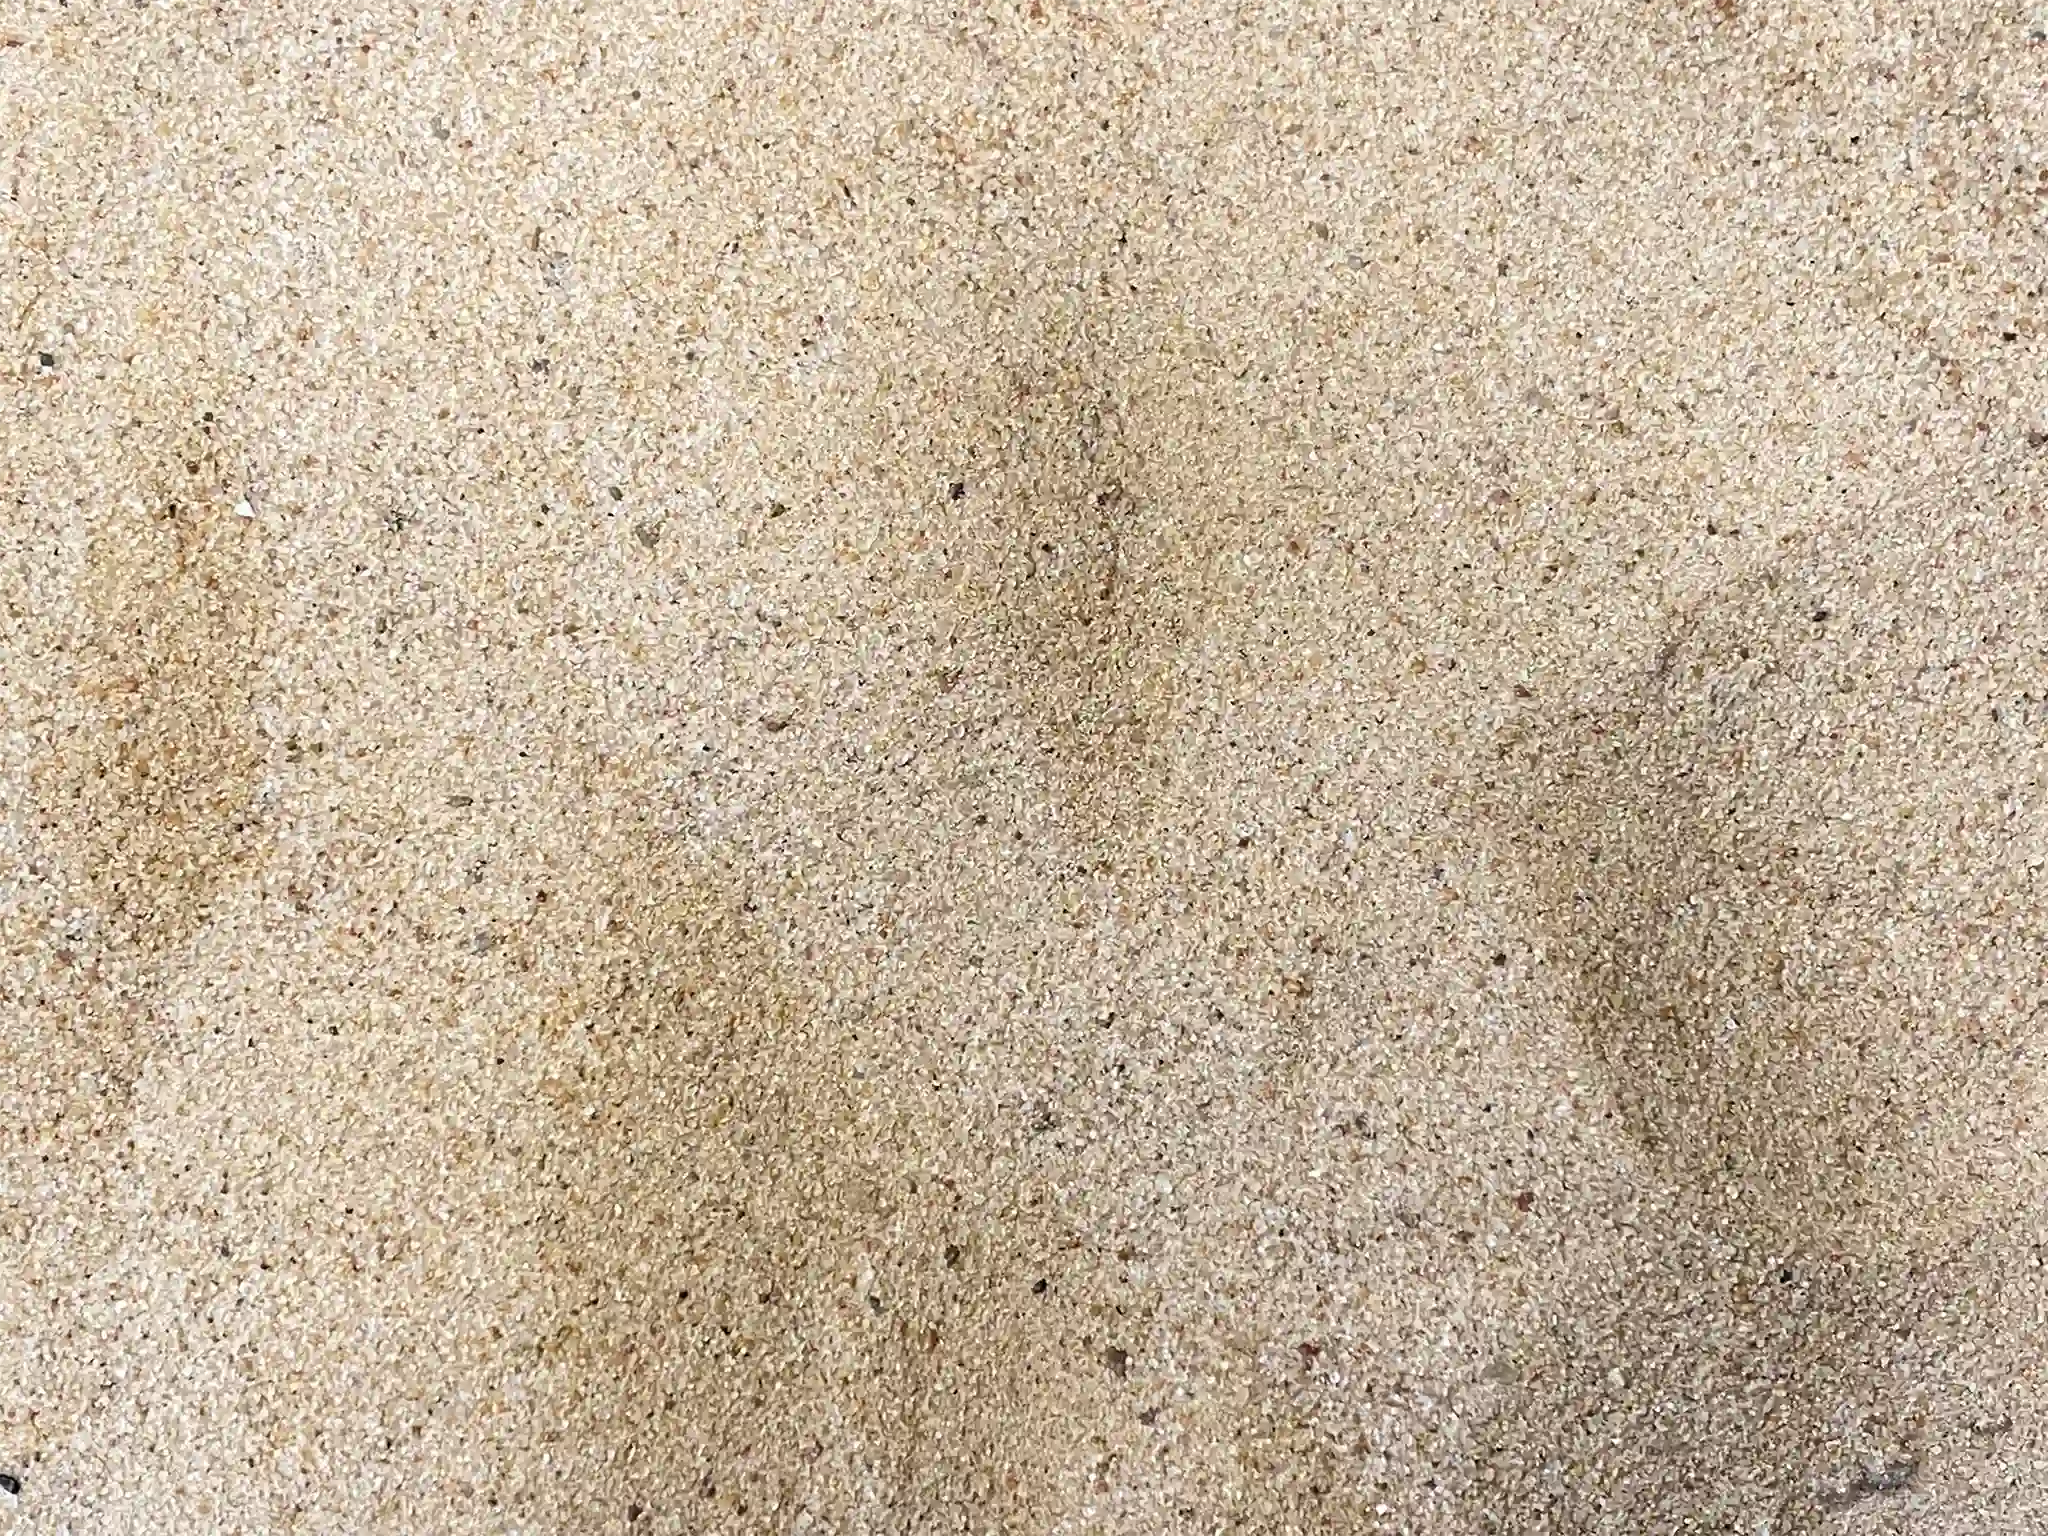 A close-up view of Fairway Sand, Capping Sand, and Golf Sand.